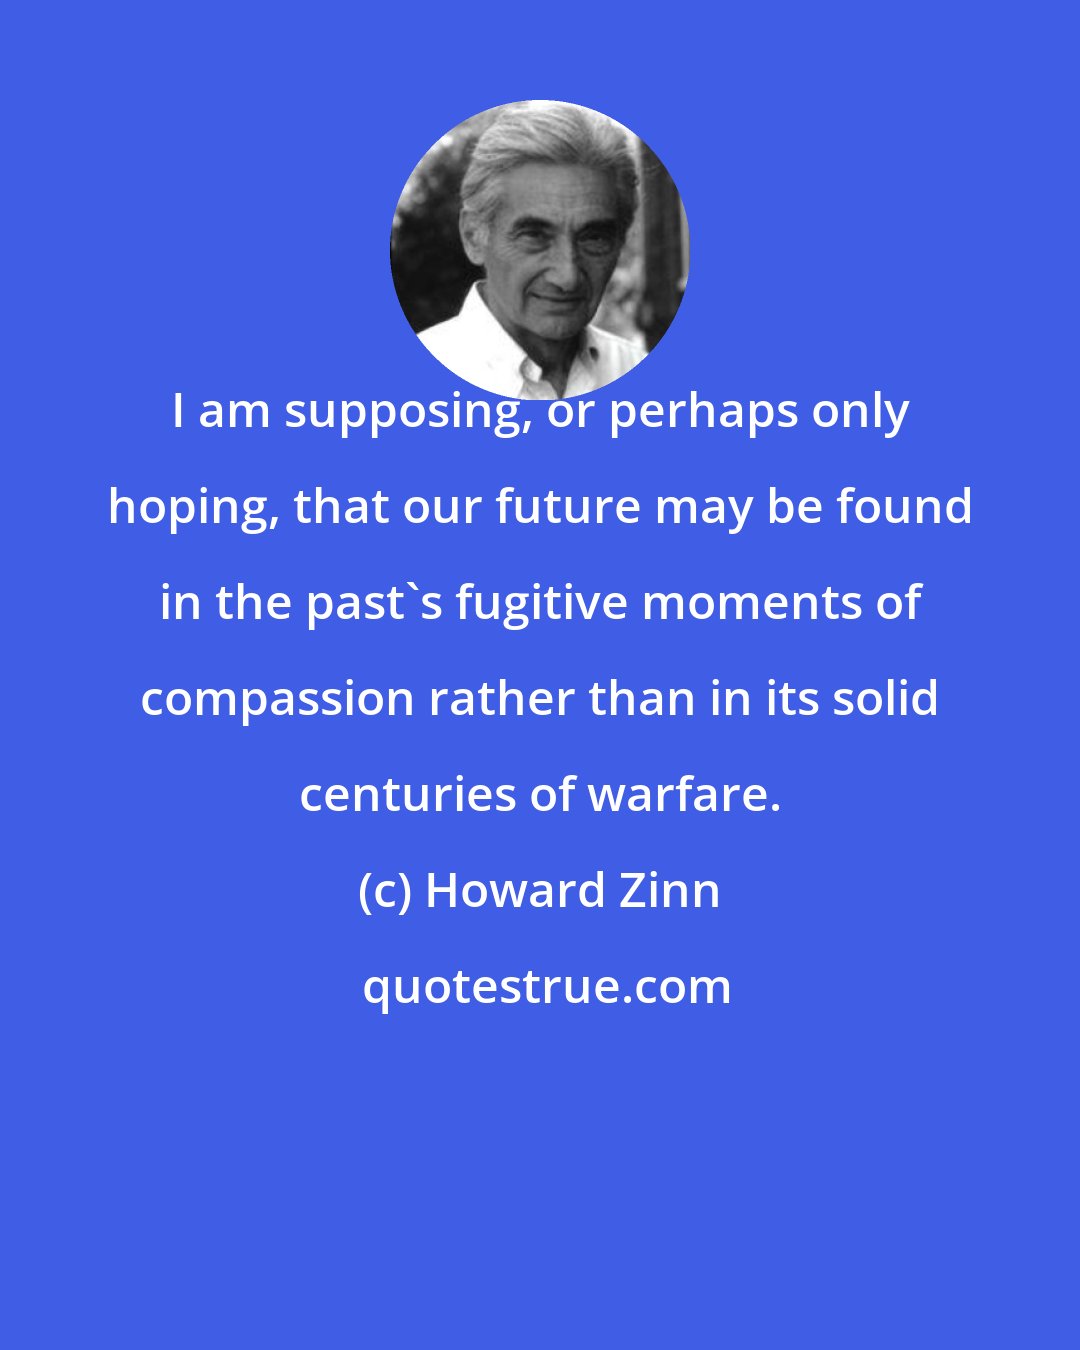 Howard Zinn: I am supposing, or perhaps only hoping, that our future may be found in the past's fugitive moments of compassion rather than in its solid centuries of warfare.